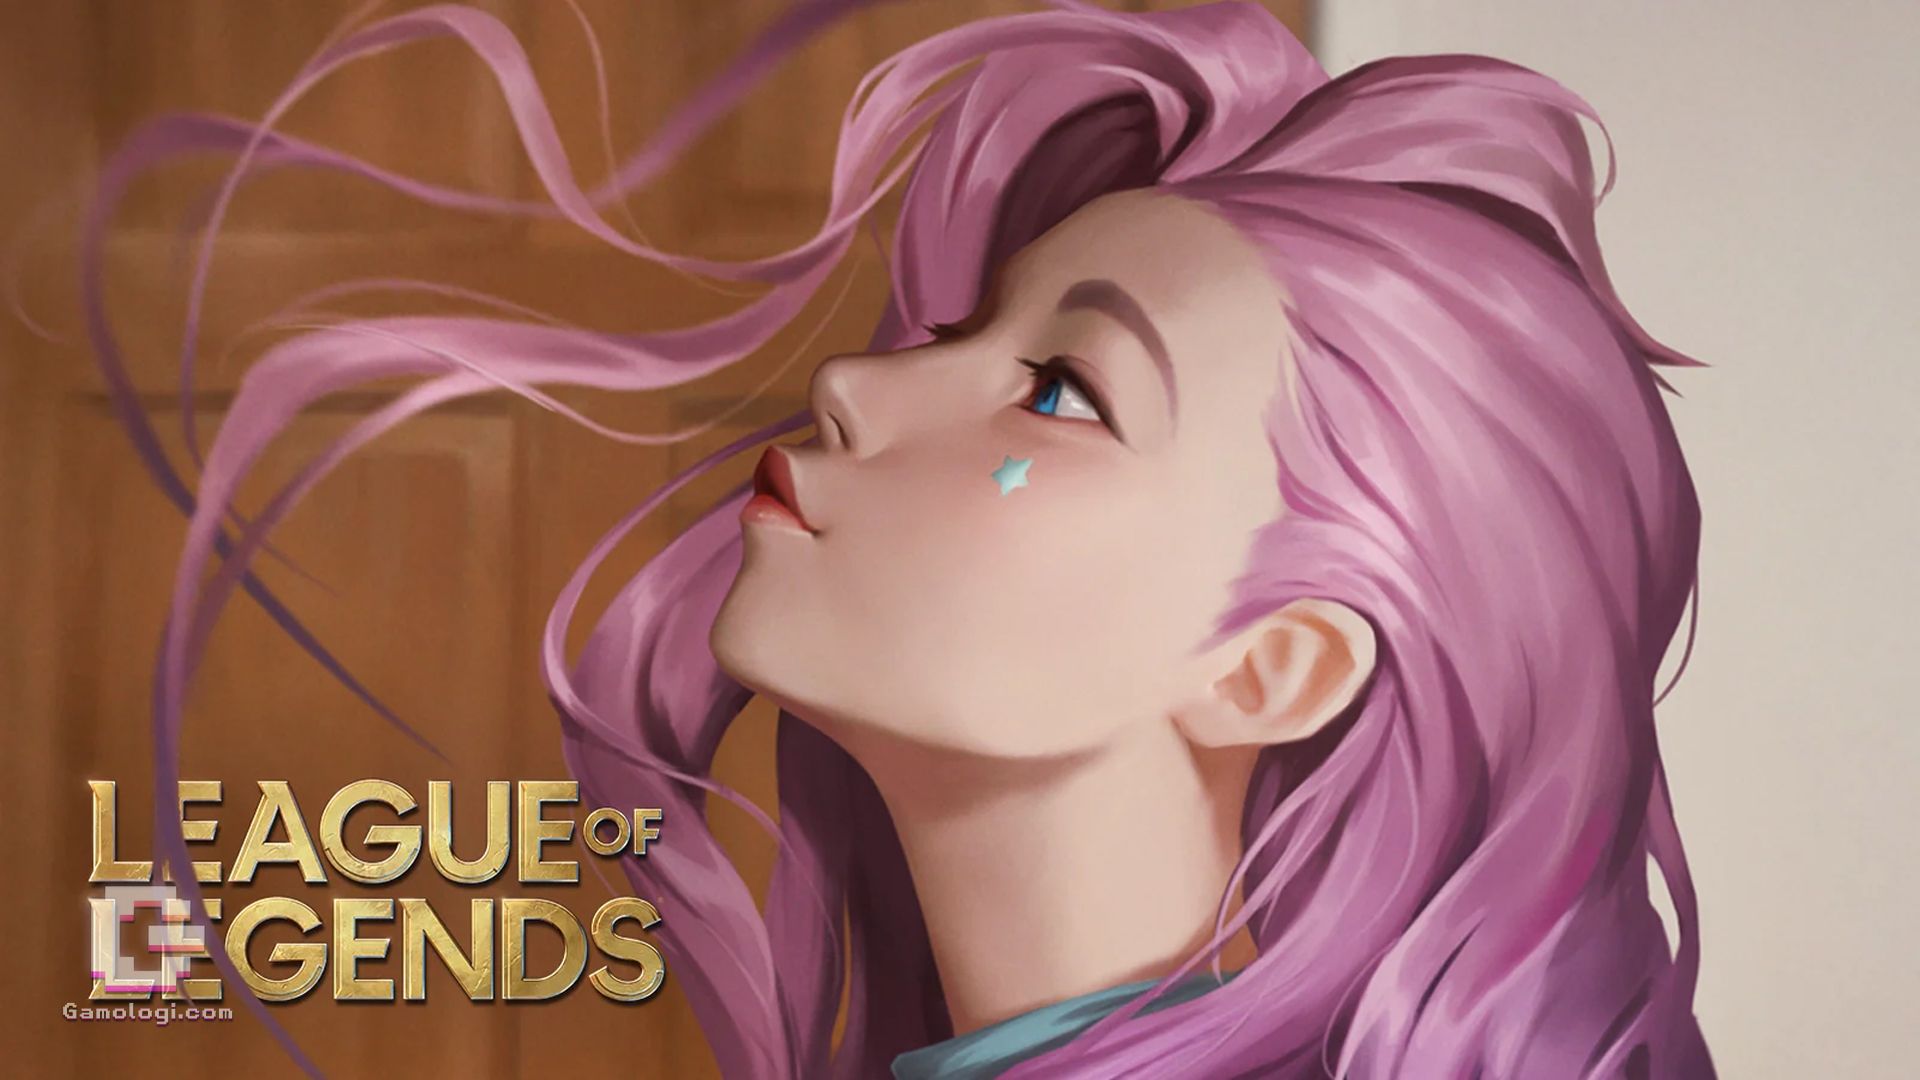 New League of Legends champion Seraphine surprisingly appeared and Retro Gaming News